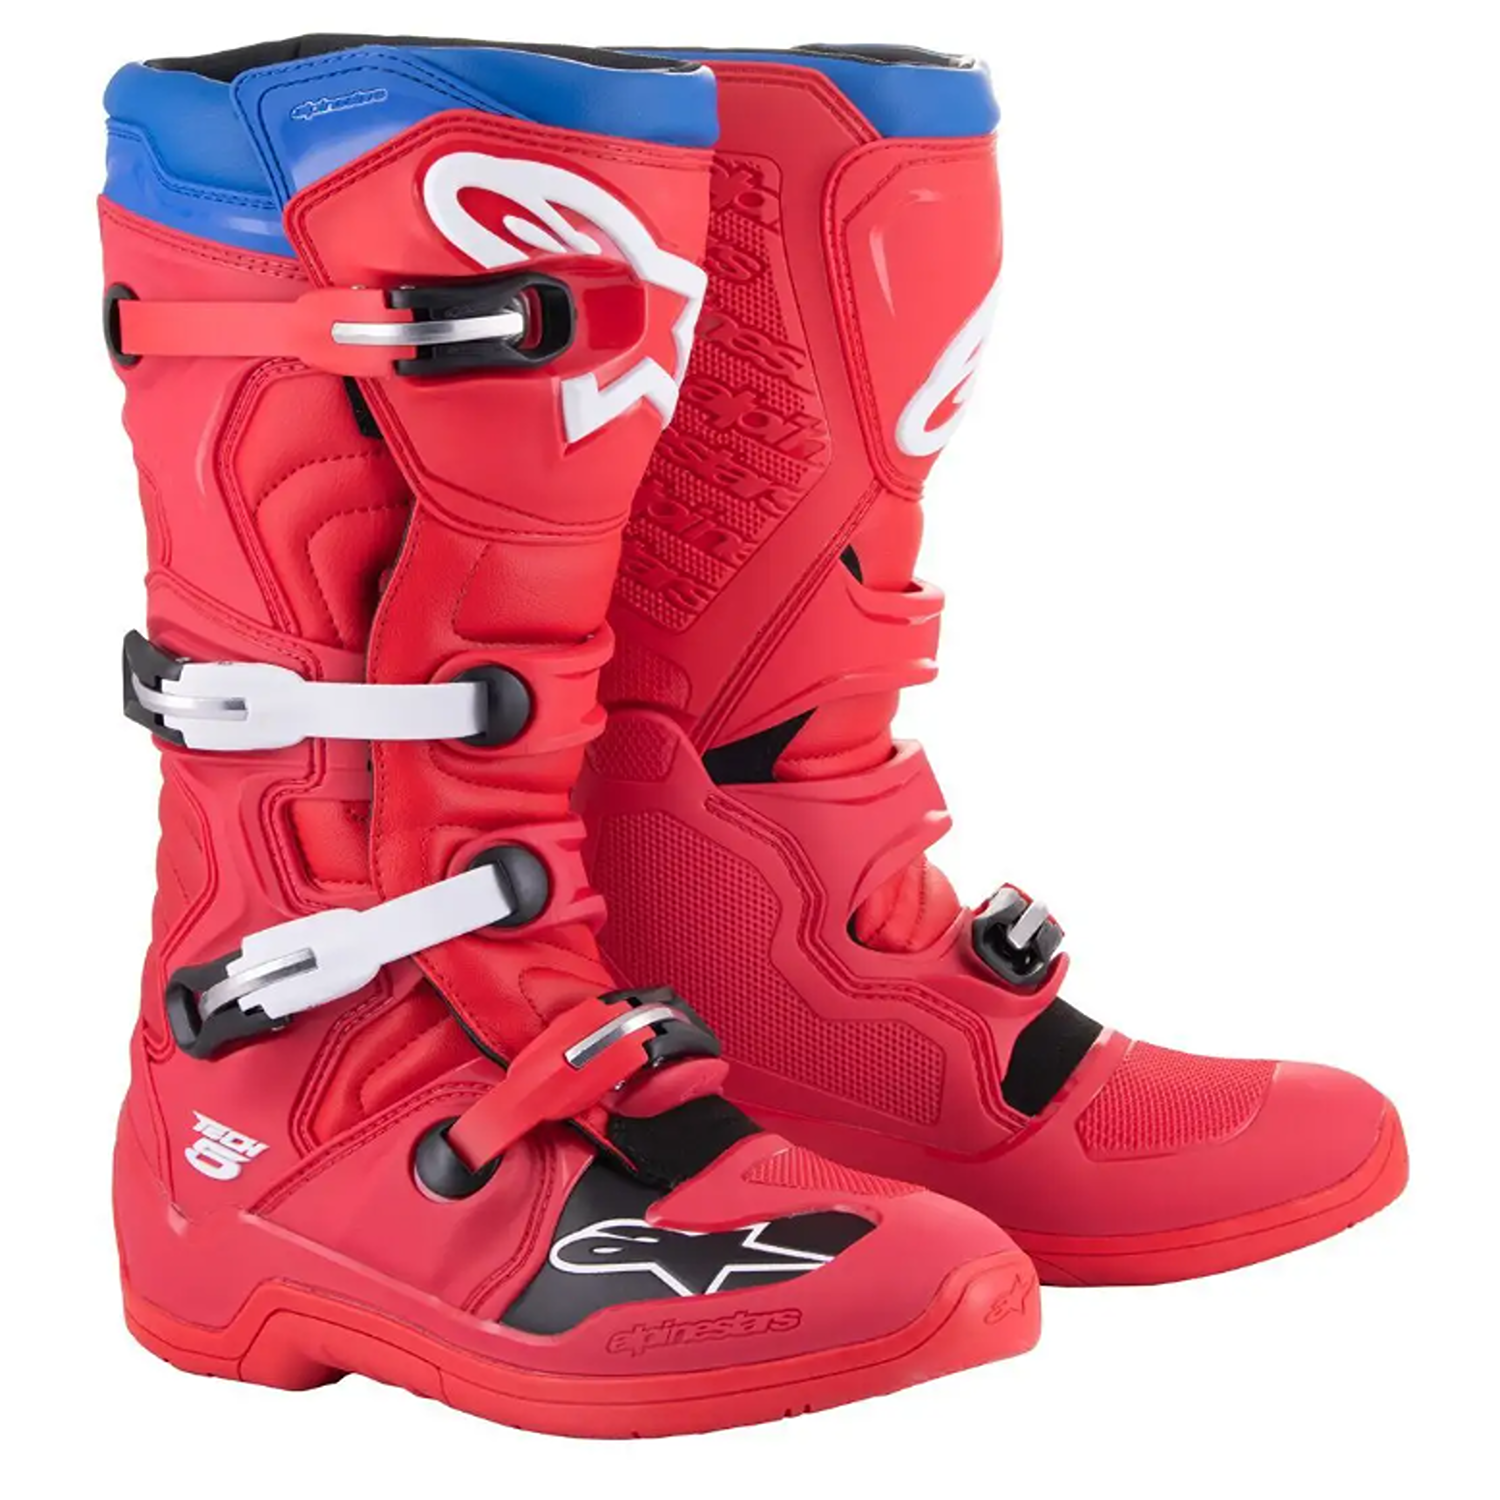 Image of Alpinestars Tech 5 Boots Bright Red Dark Red Blue Size US 14 ID 8059347199399